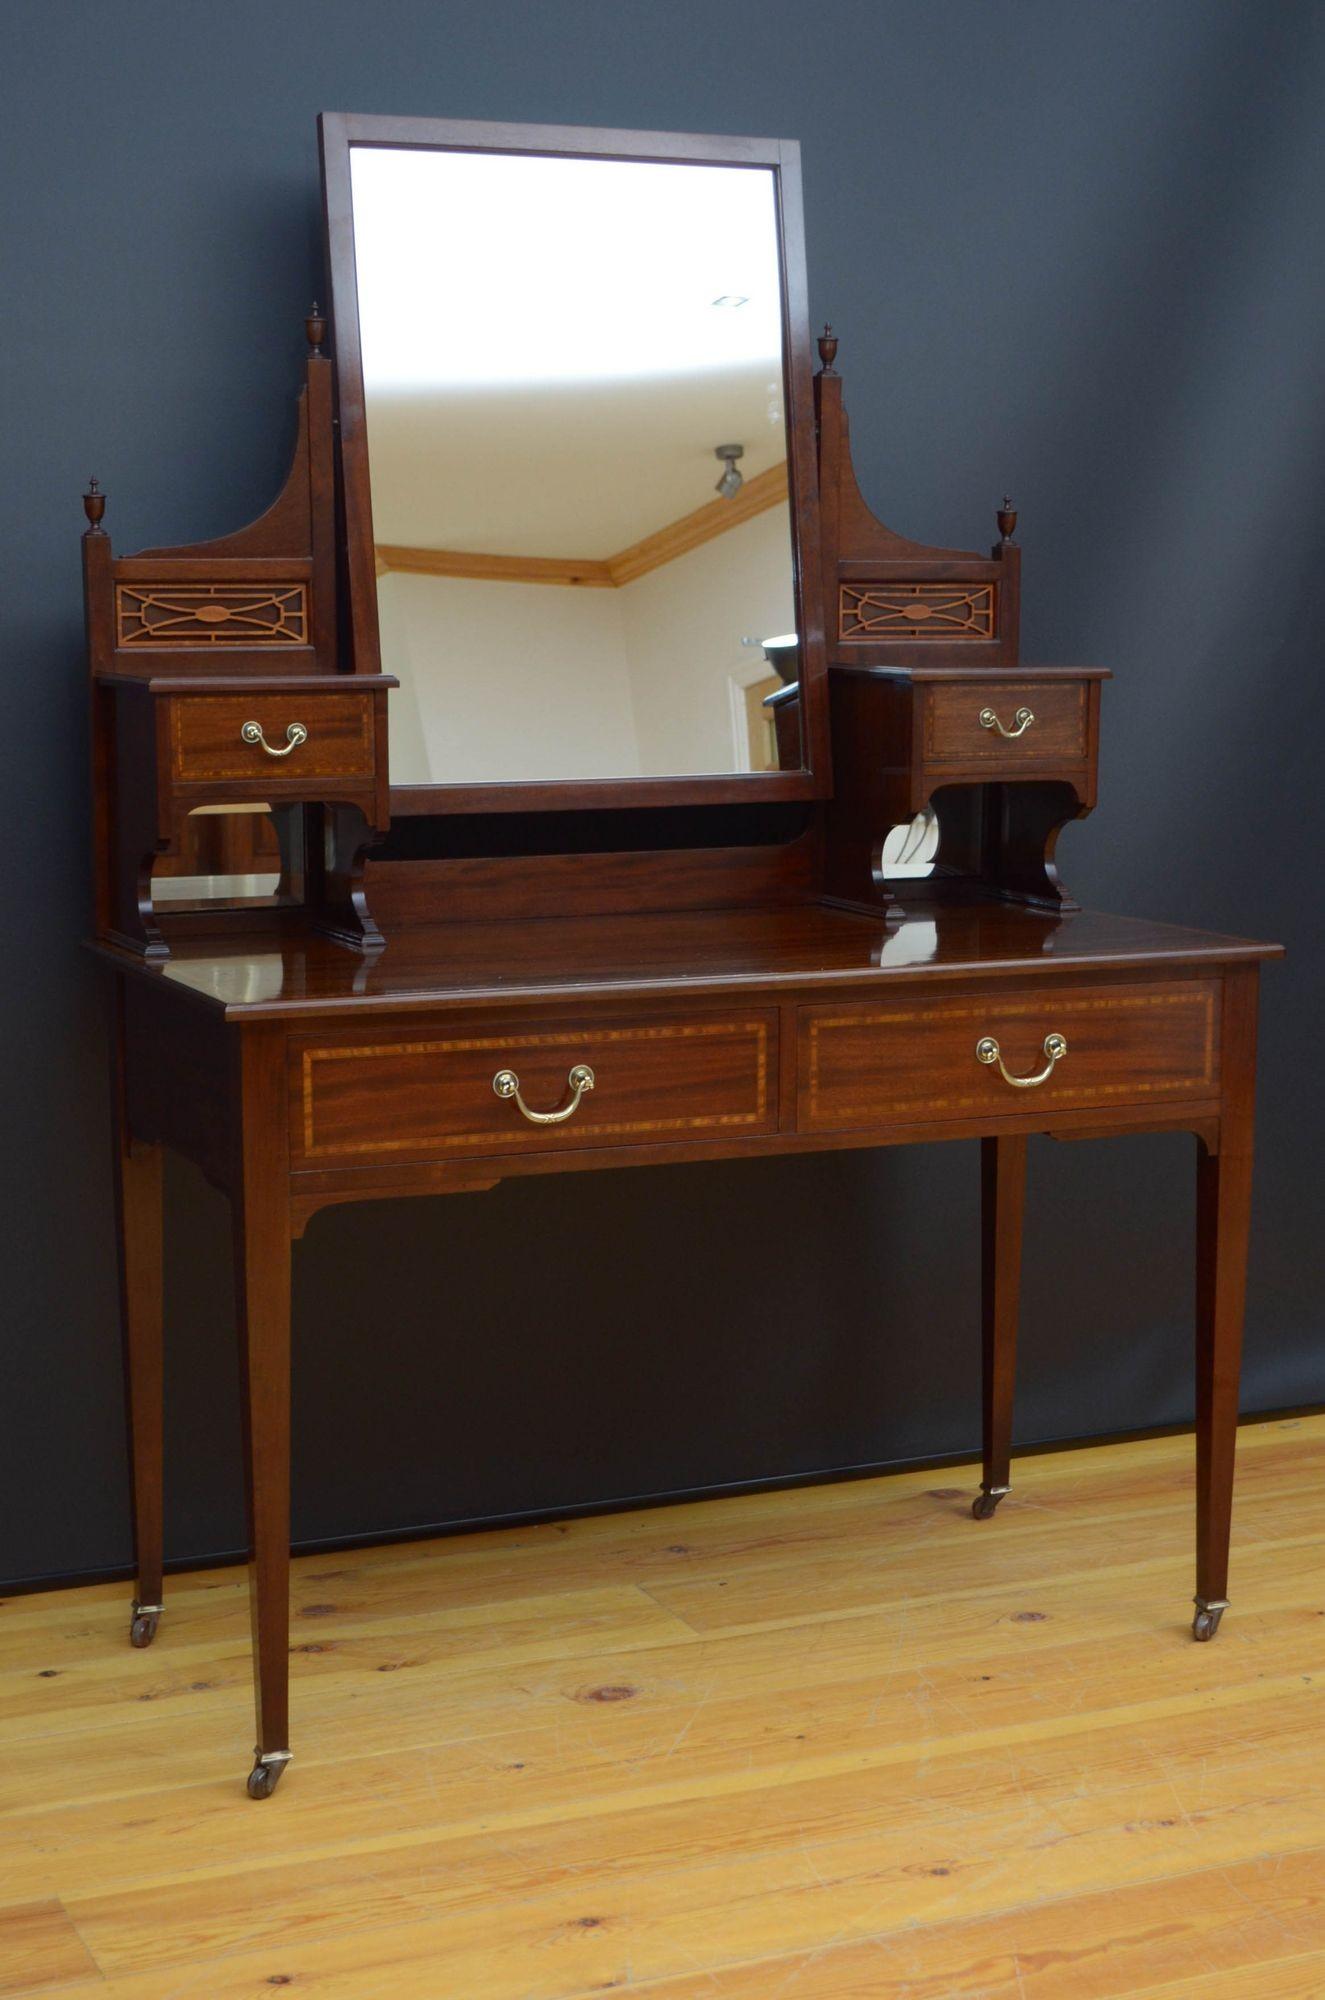 Sn5395 Superb quality and very stylish, Edwardian, mahogany dressing table by Maple & Co, London, having swing mirror in shaped supports with original turned finials, satinwood fretwork panels and small crossbanded jewellery drawers with mirrors